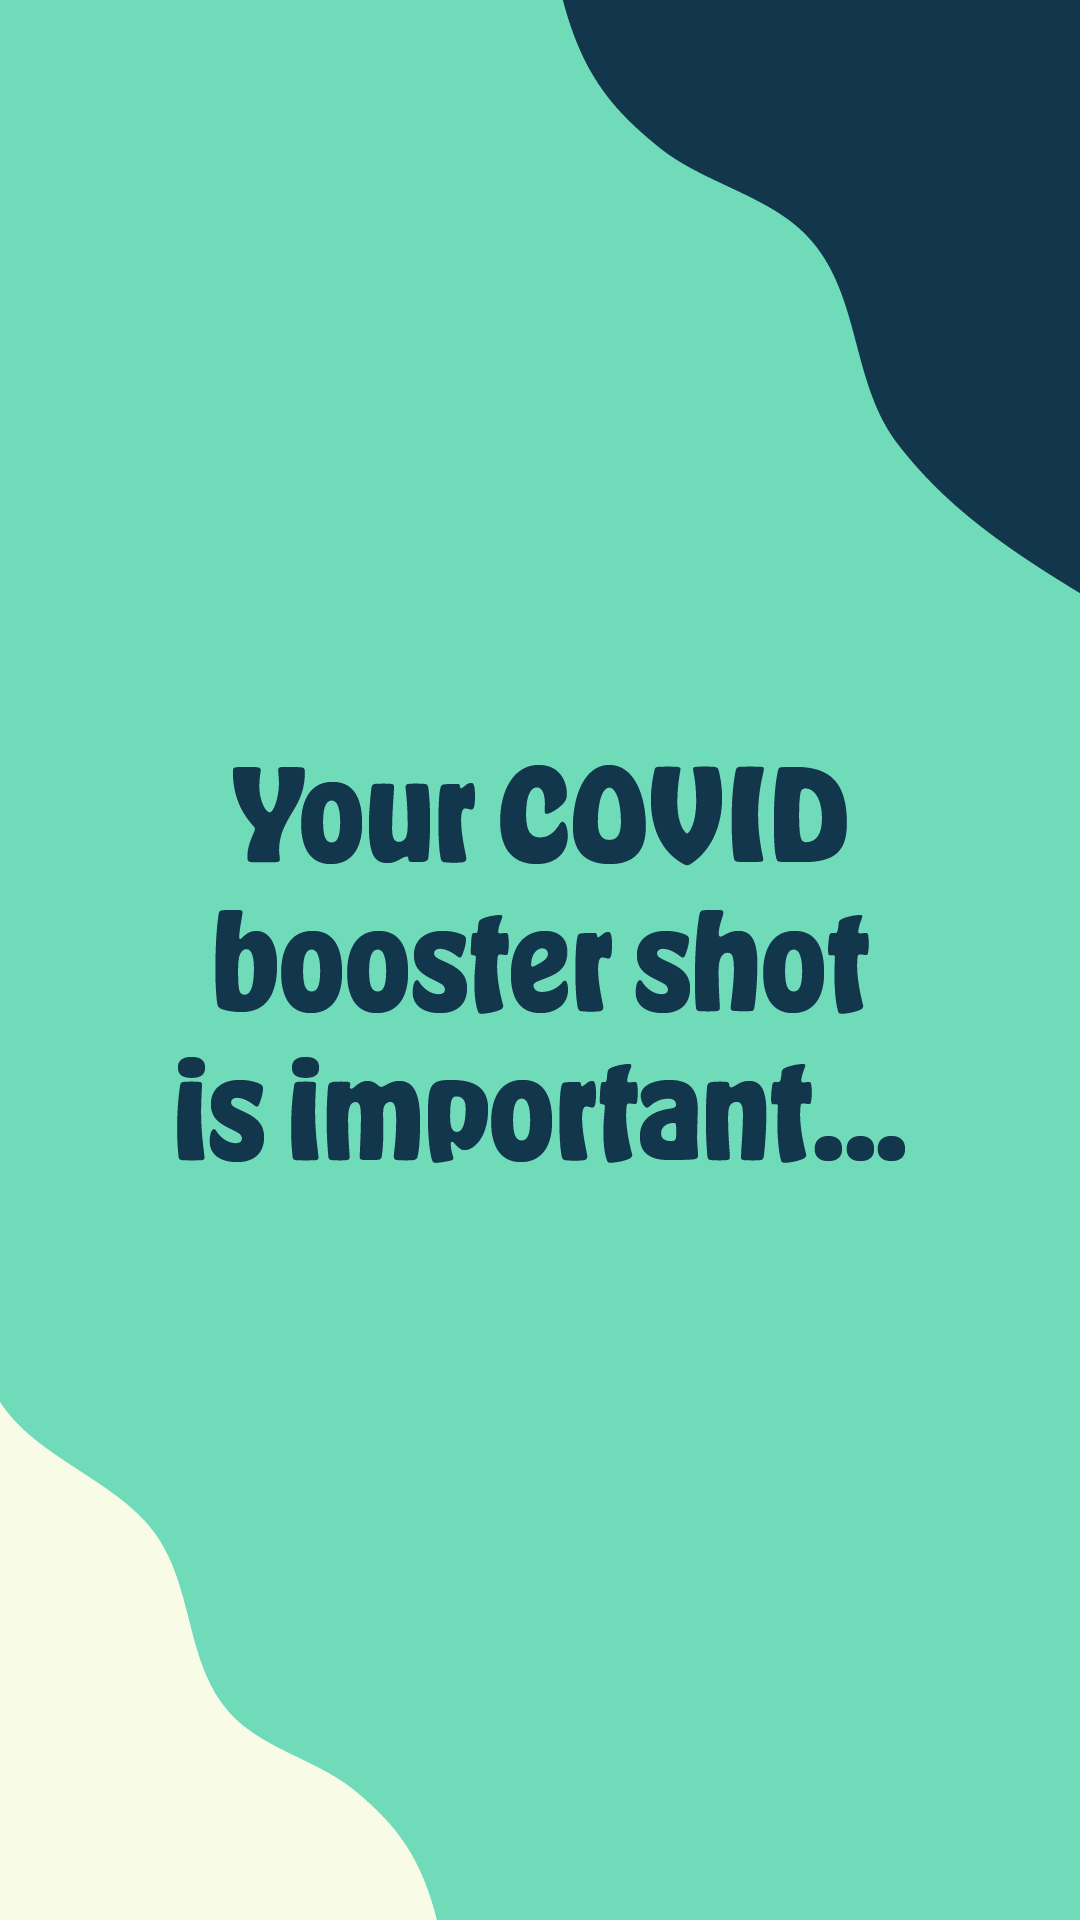 Text reads "Your COVID booster shot is important"